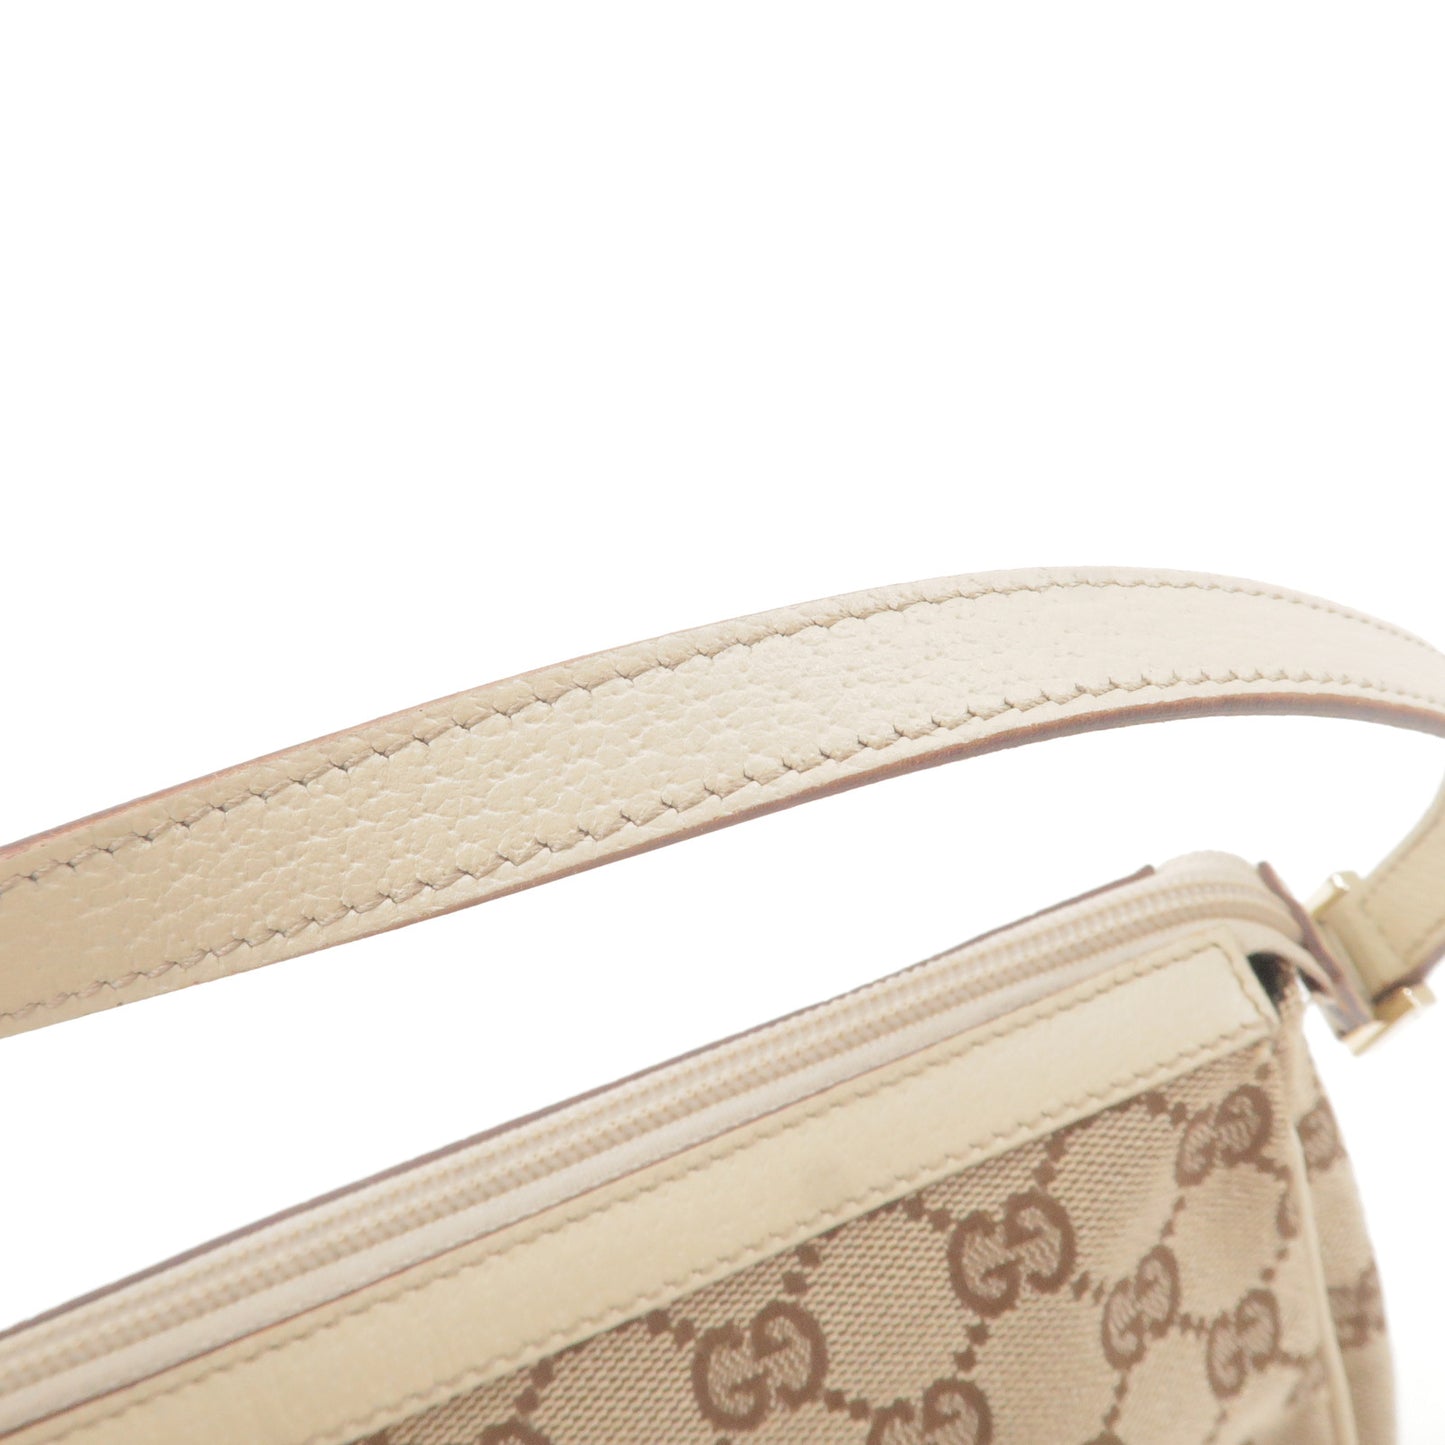 Gucci Abbey Beige White Canvas Authentic Leather Vintage Tote 